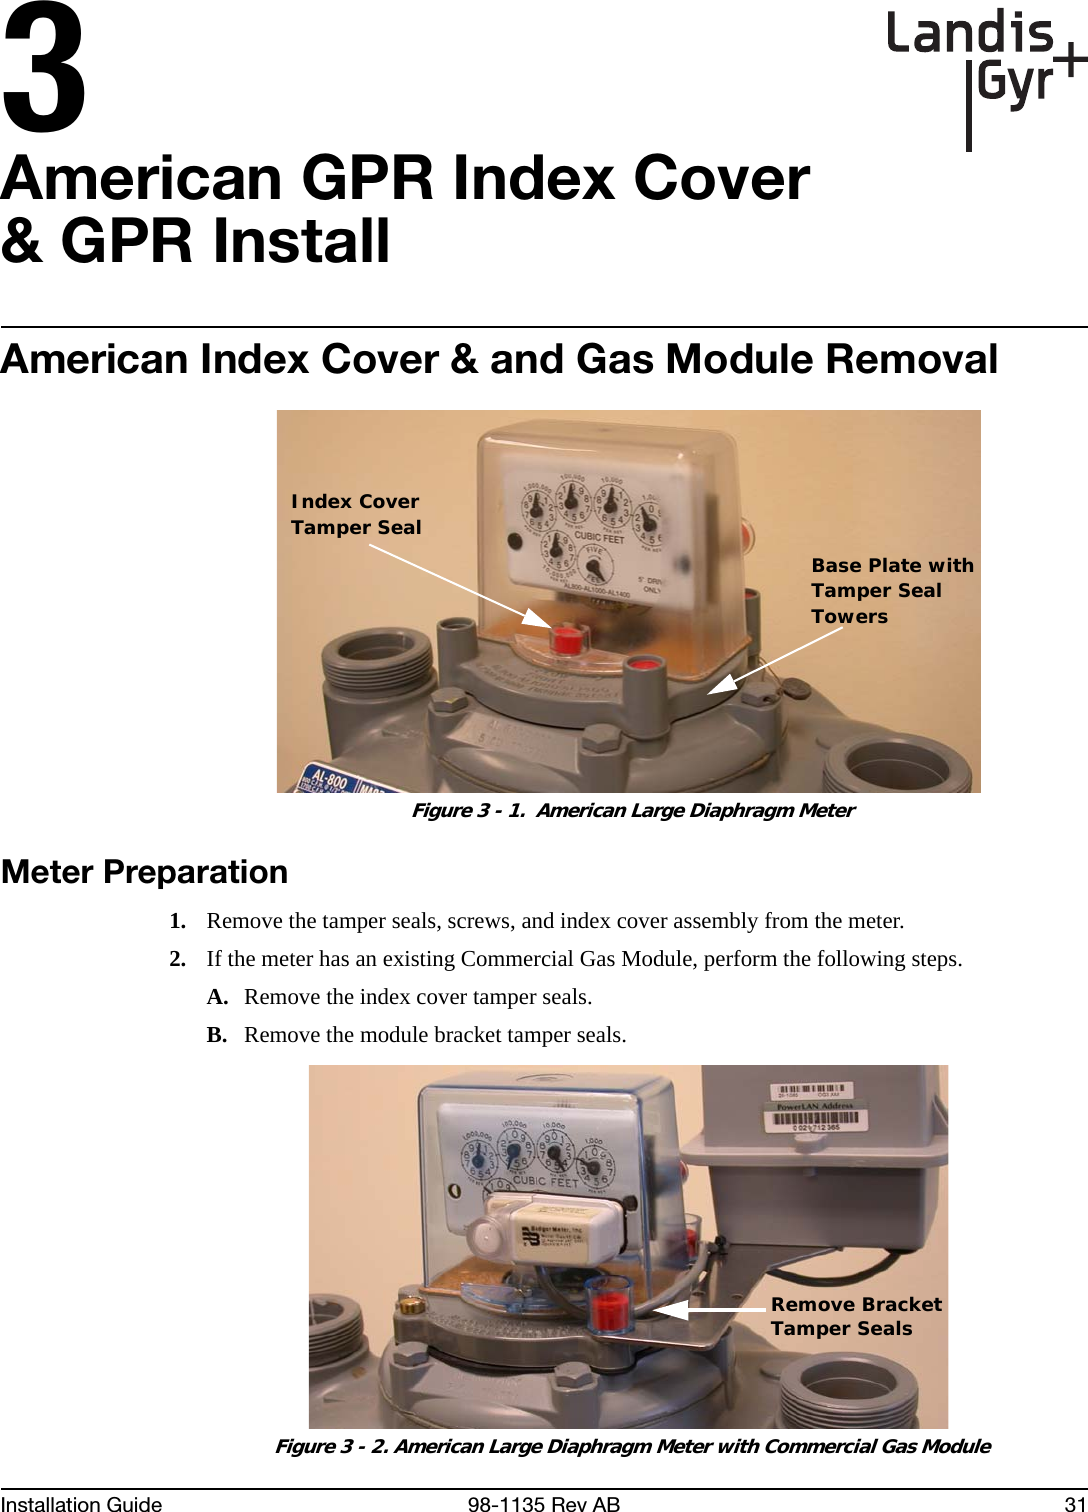 3Installation Guide 98-1135 Rev AB 31American GPR Index Cover &amp; GPR InstallAmerican Index Cover &amp; and Gas Module Removal Figure 3 - 1.  American Large Diaphragm MeterMeter Preparation1. Remove the tamper seals, screws, and index cover assembly from the meter.2. If the meter has an existing Commercial Gas Module, perform the following steps.A. Remove the index cover tamper seals.B. Remove the module bracket tamper seals. Figure 3 - 2. American Large Diaphragm Meter with Commercial Gas ModuleIndex CoverTamper SealBase Plate withTamper SealTowersRemove BracketTamper Seals